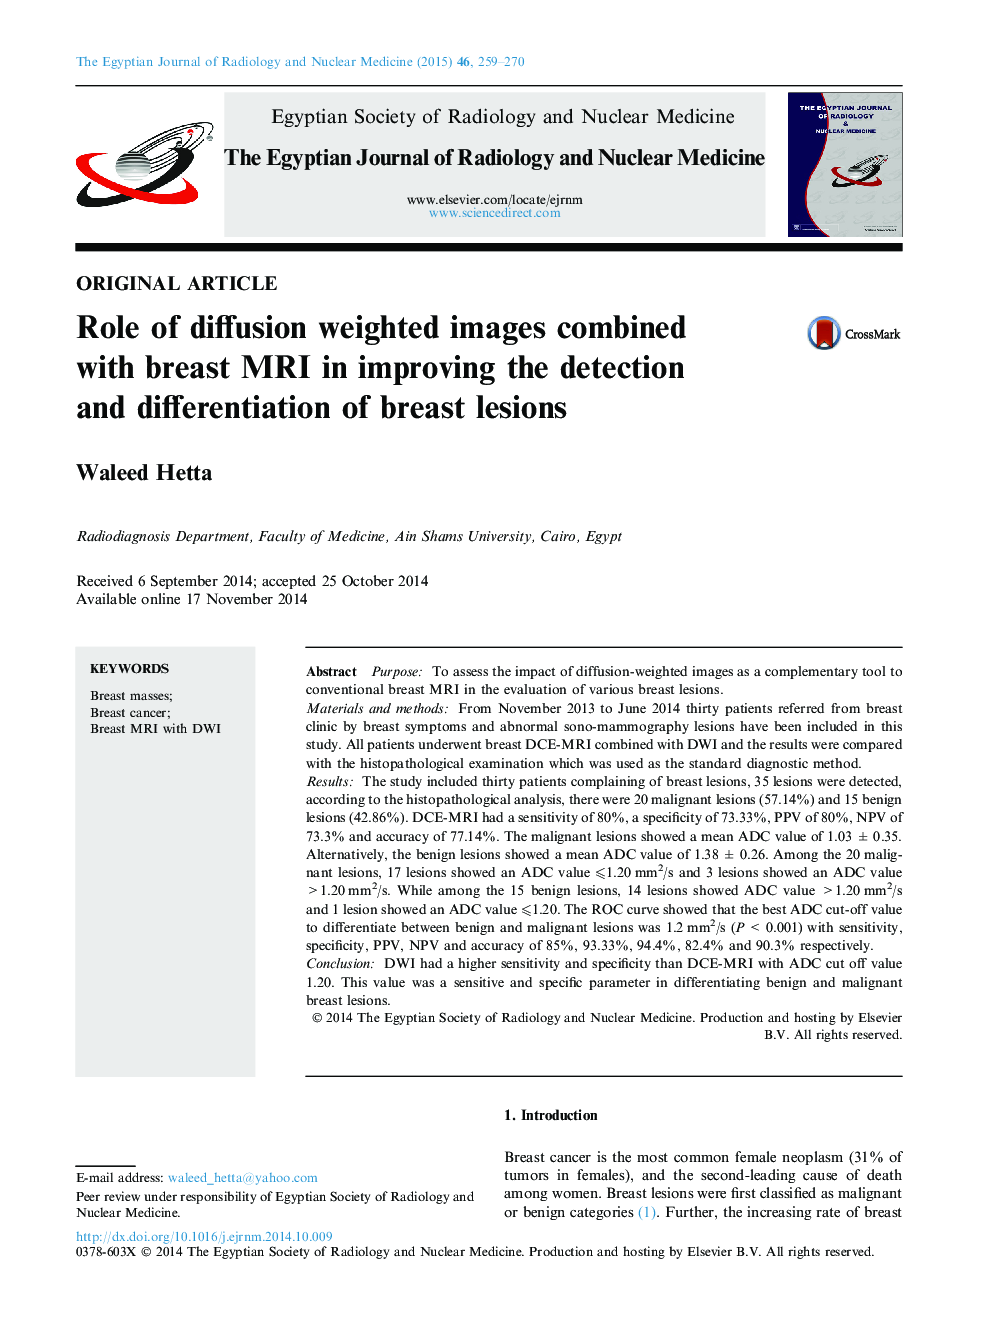 Role of diffusion weighted images combined with breast MRI in improving the detection and differentiation of breast lesions 